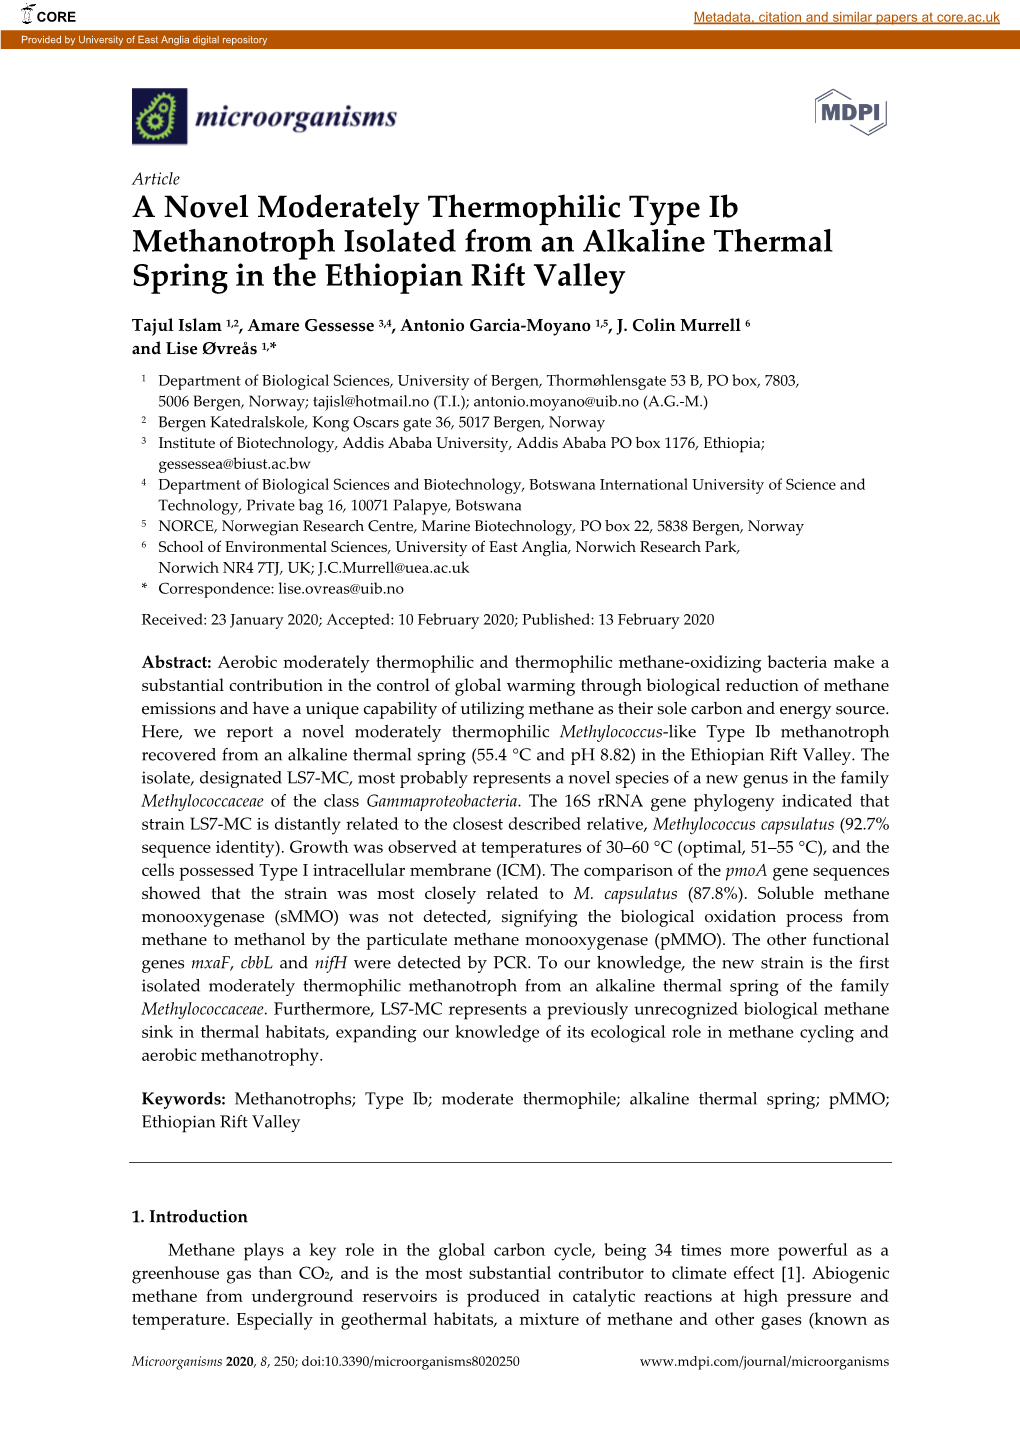 A Novel Moderately Thermophilic Type Ib Methanotroph Isolated from an Alkaline Thermal Spring in the Ethiopian Rift Valley